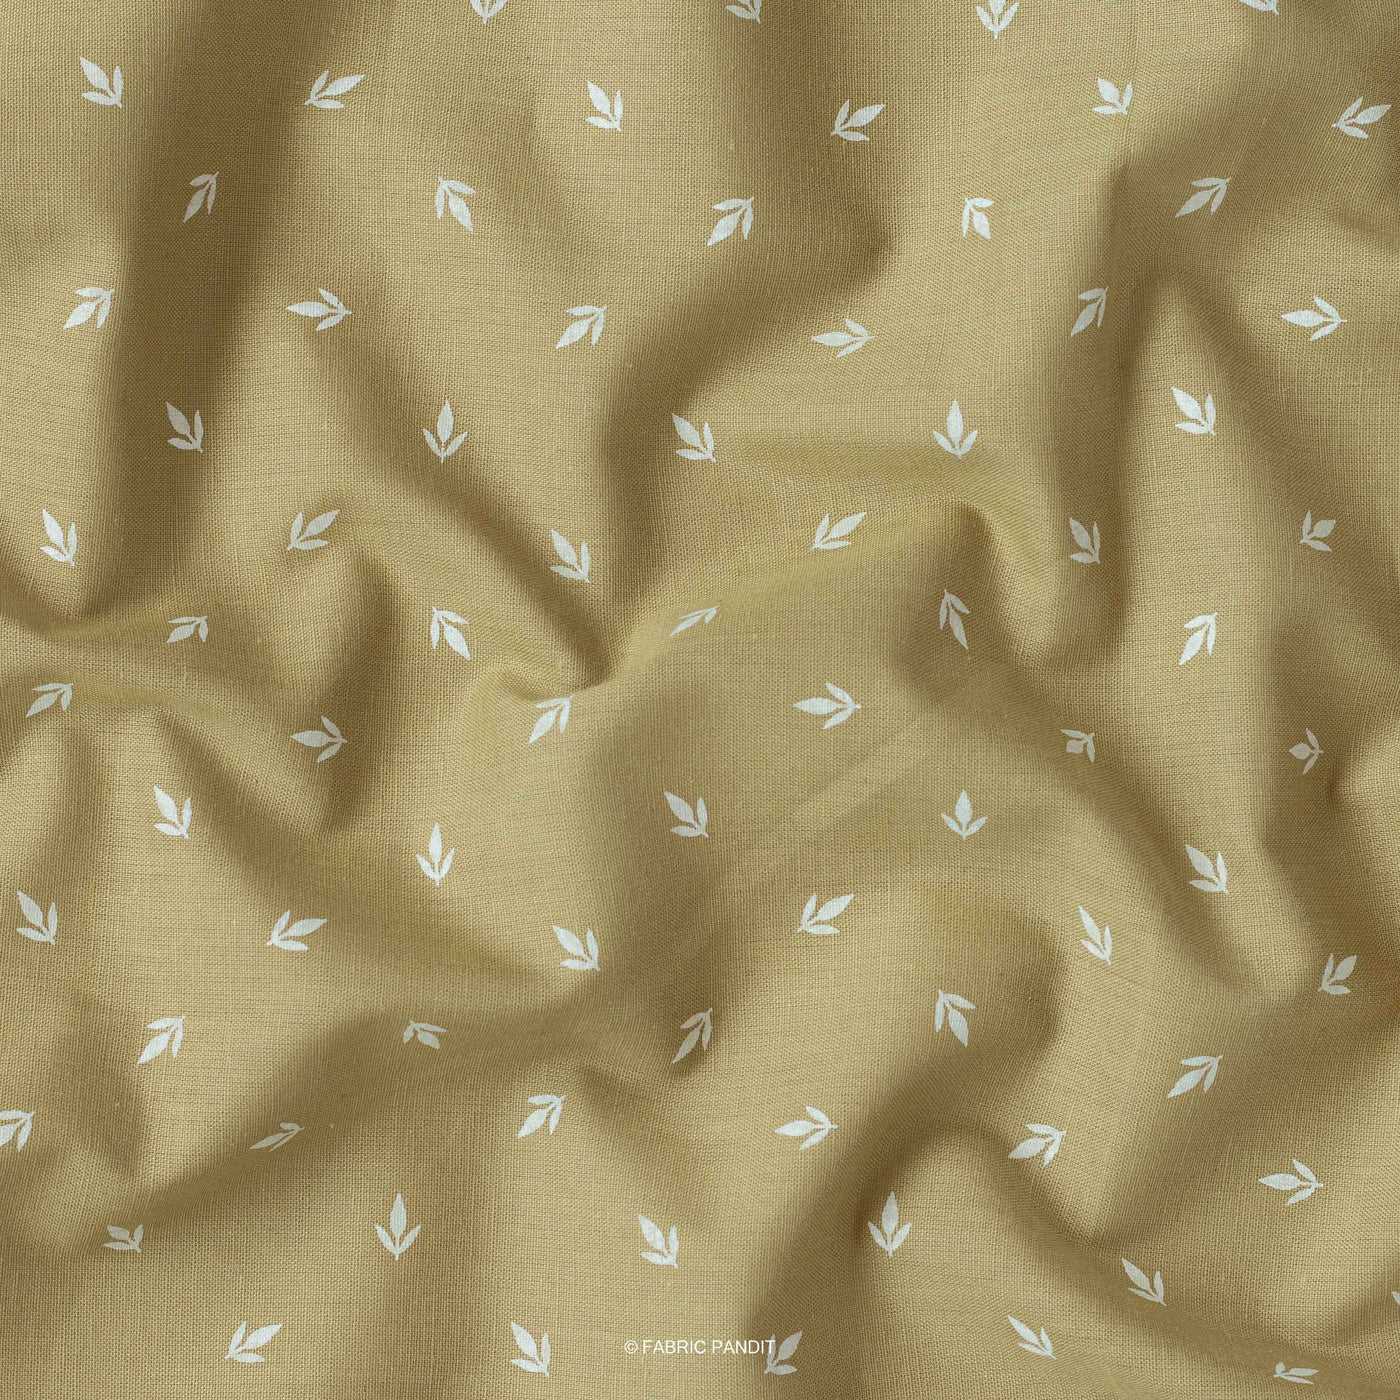 Fabric Pandit Cut Piece (Cut Piece) Dark Olive Green Color Leaf Pattern Block Printed Cotton Linen Fabric (Width 42 Inches)